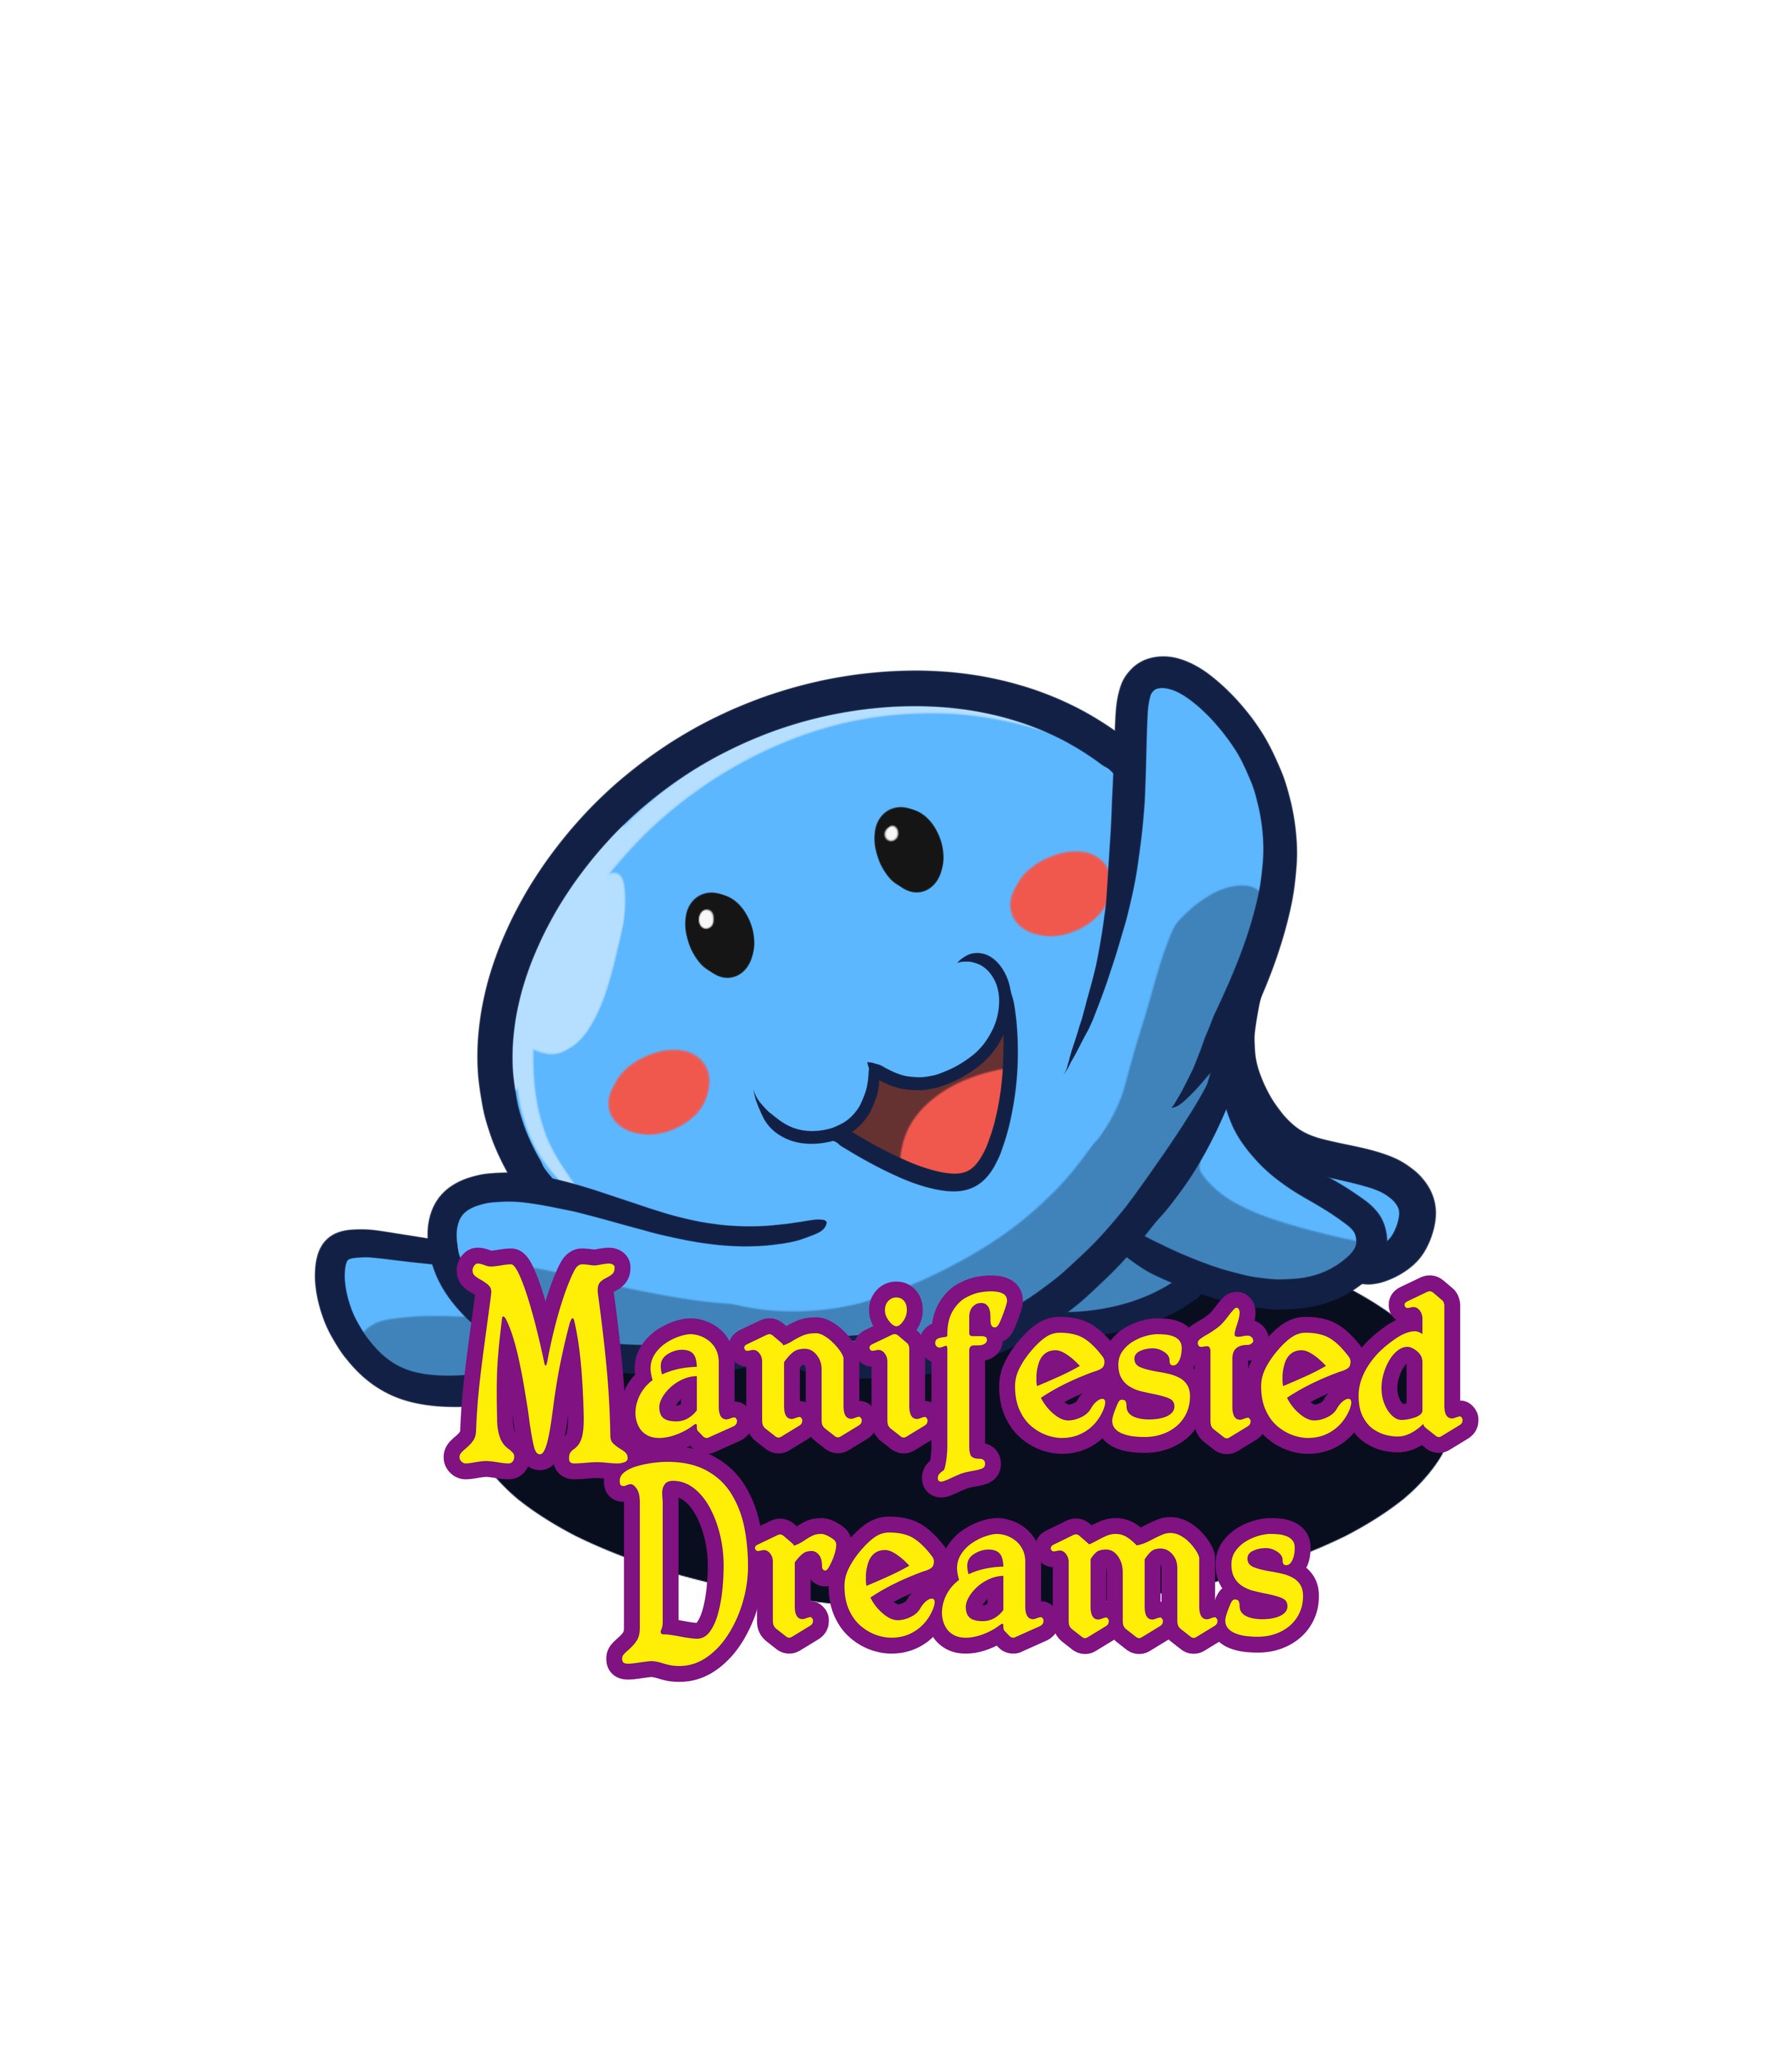 Manifested Dreams